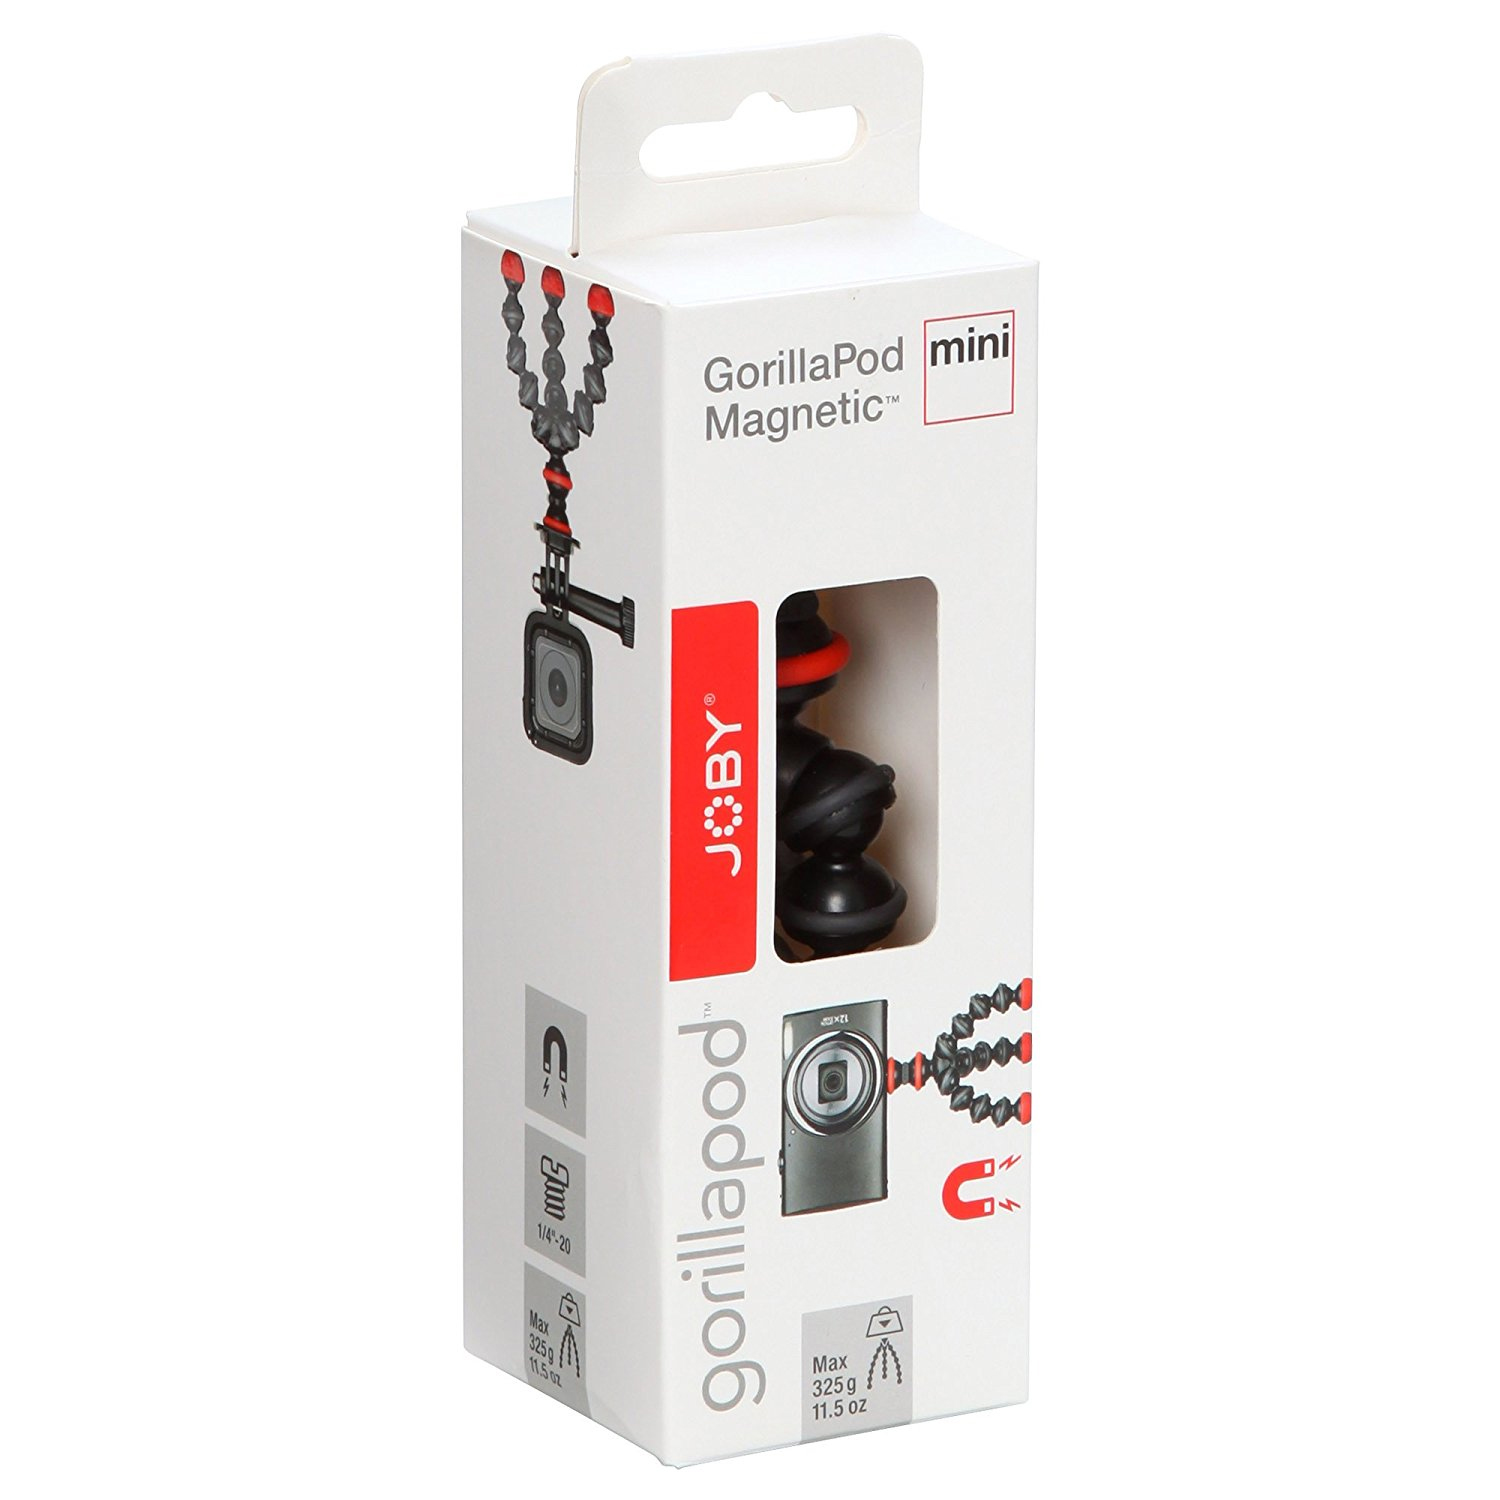 Joby GorillaPod Magnetic Mini Flexible Tripod for Point & Shoot and Small Cameras - image 5 of 5